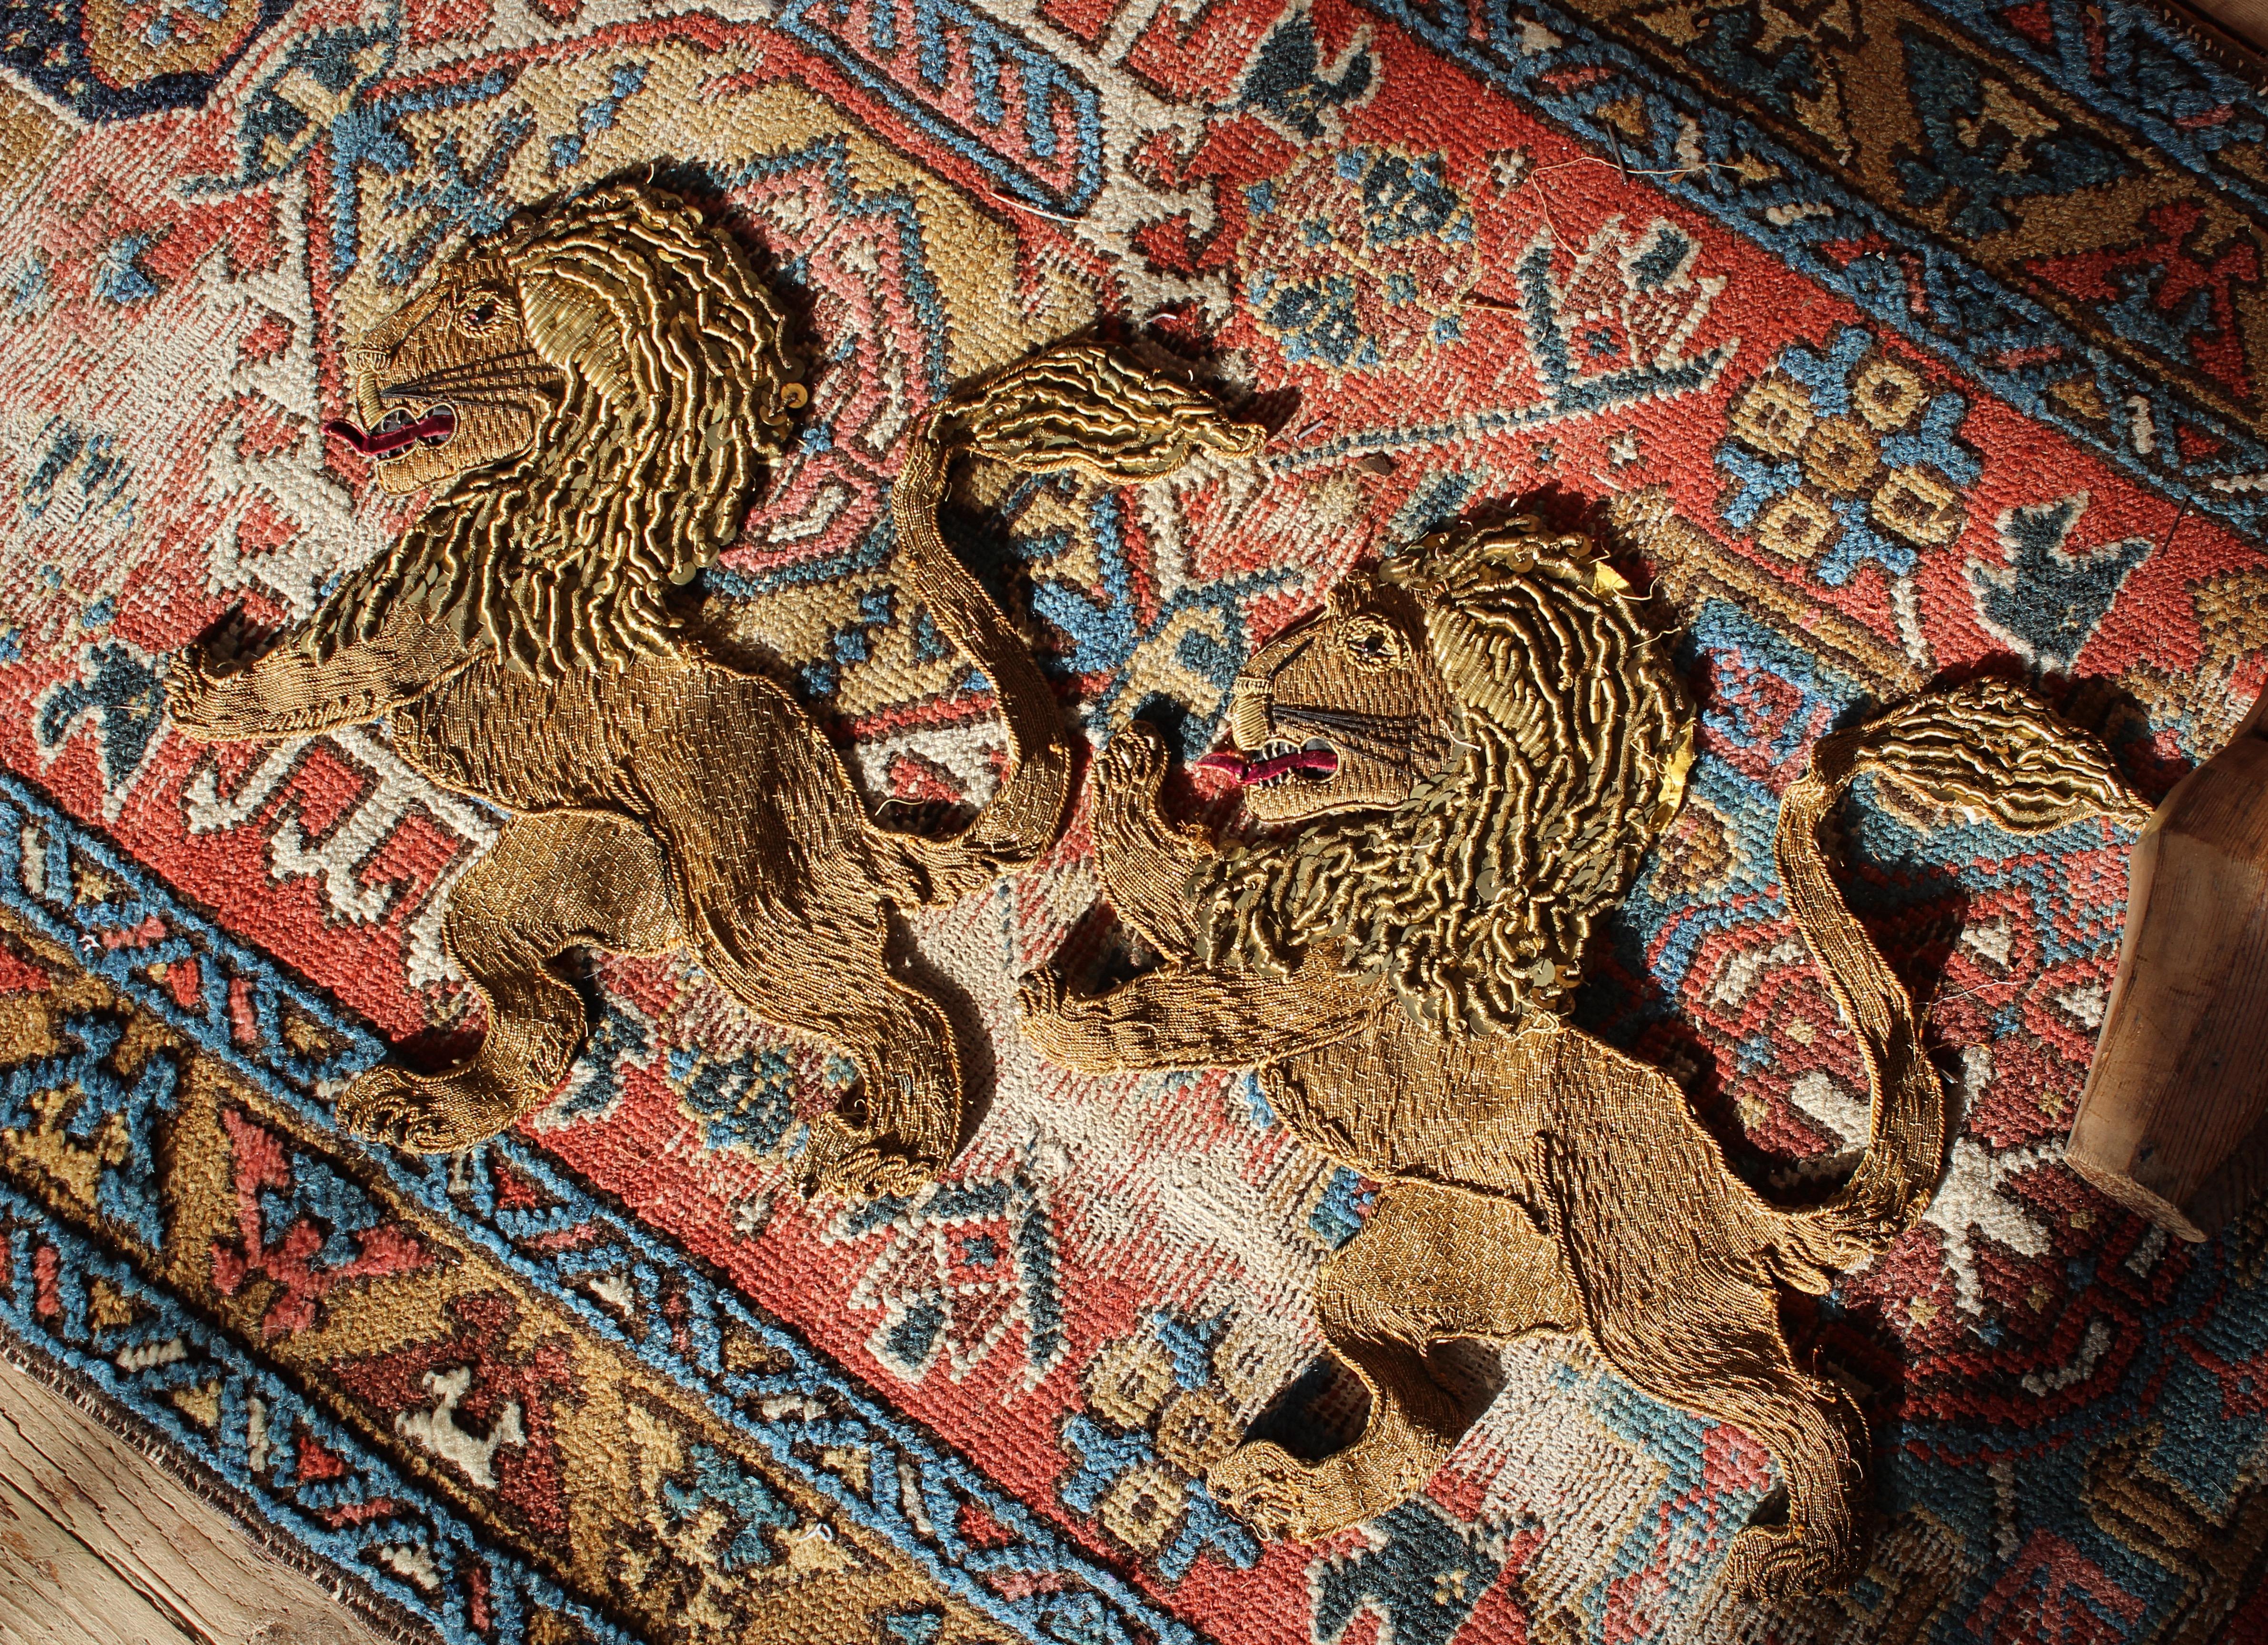 A fine hand made pair of appliqués, metal threaded, with sequins, velvet highlights and beaded eyes.

Depicting a pair of rampant lions, possibly previously part of a military banner or the like.

Second quarter of the 20th century in age 

38cm in